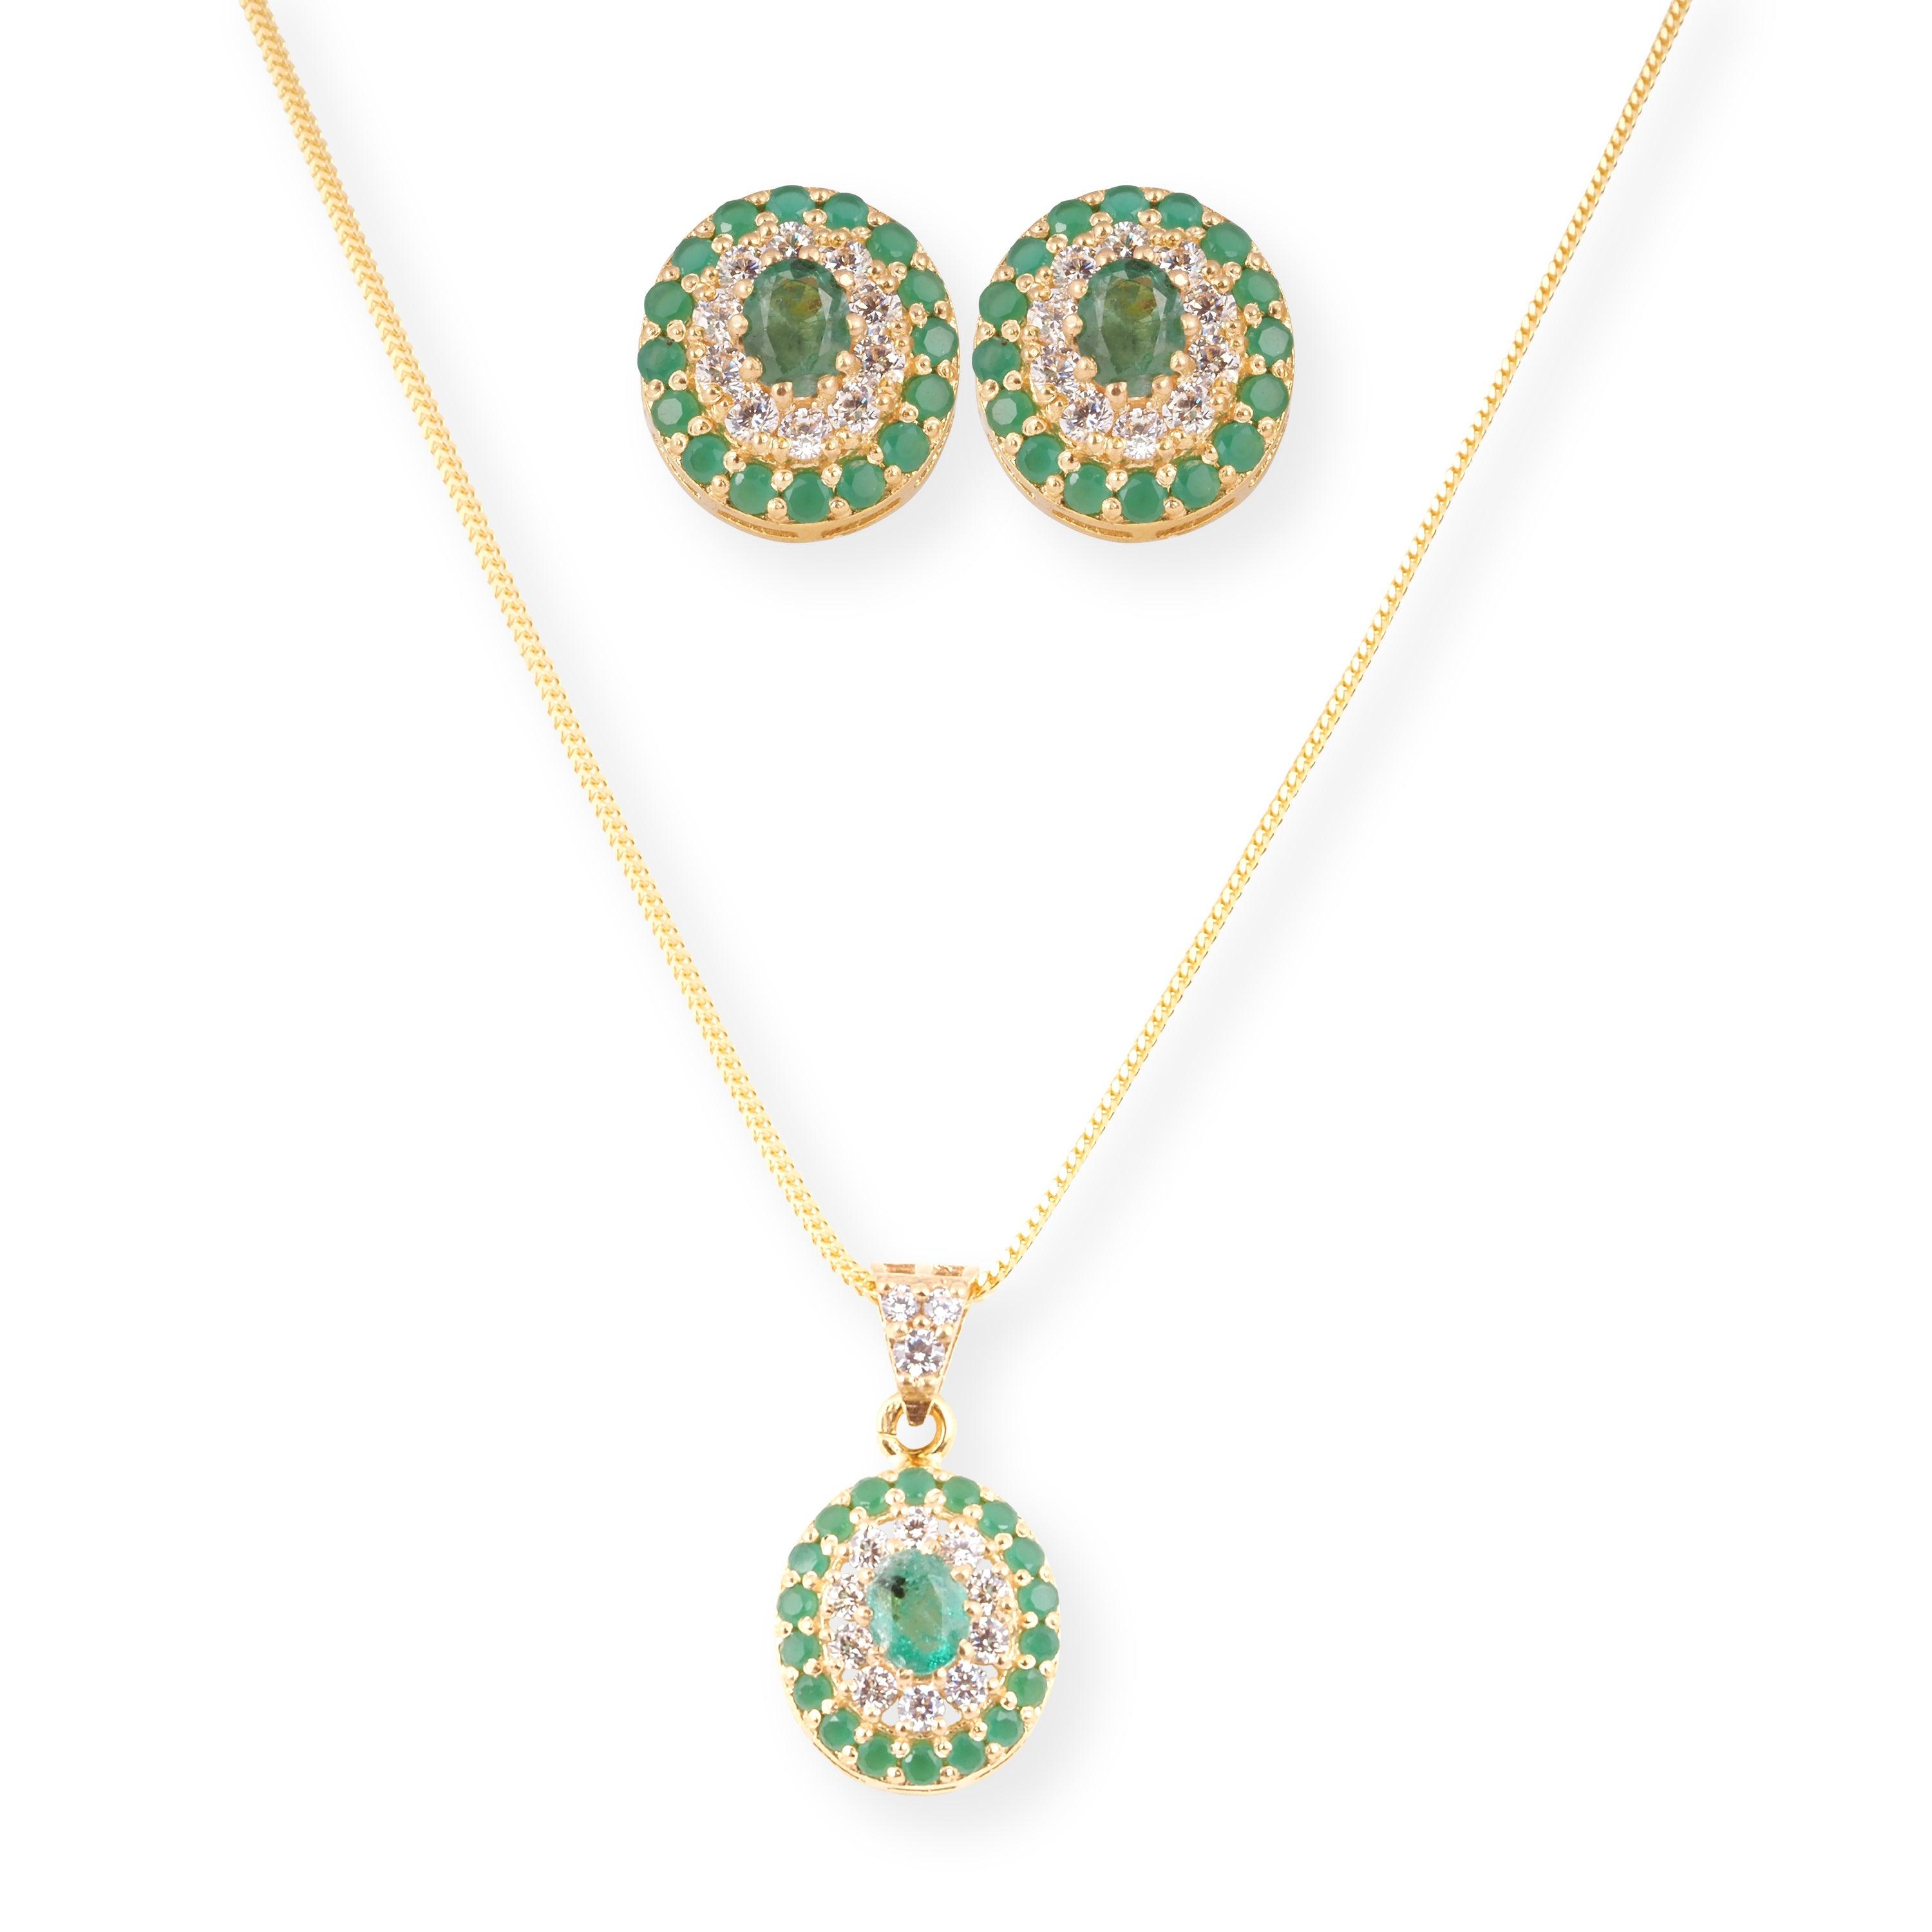 22ct Gold Set with Green and Cubic Zirconia Stones (Pendant + Chain + Earrings) P-8009 E-8009A - Minar Jewellers